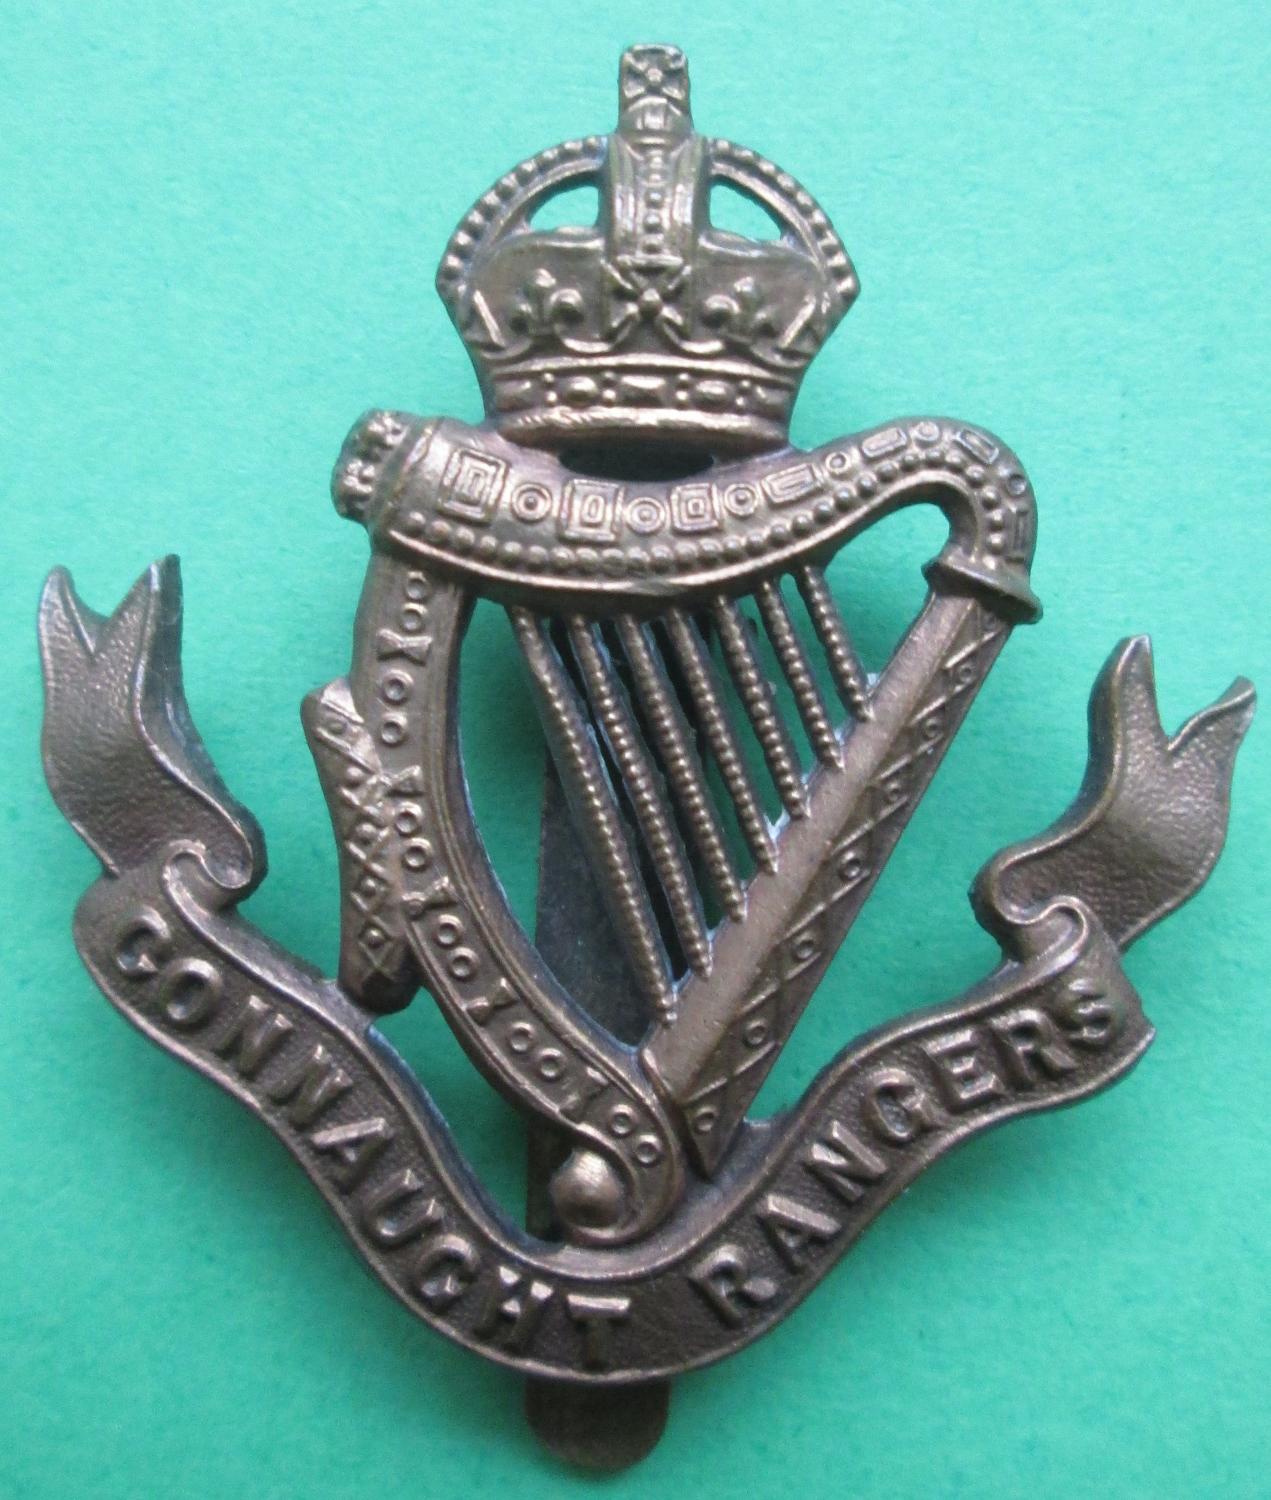 A CONNAUGHT RANGERS OTHER RANKS CAP BADGE